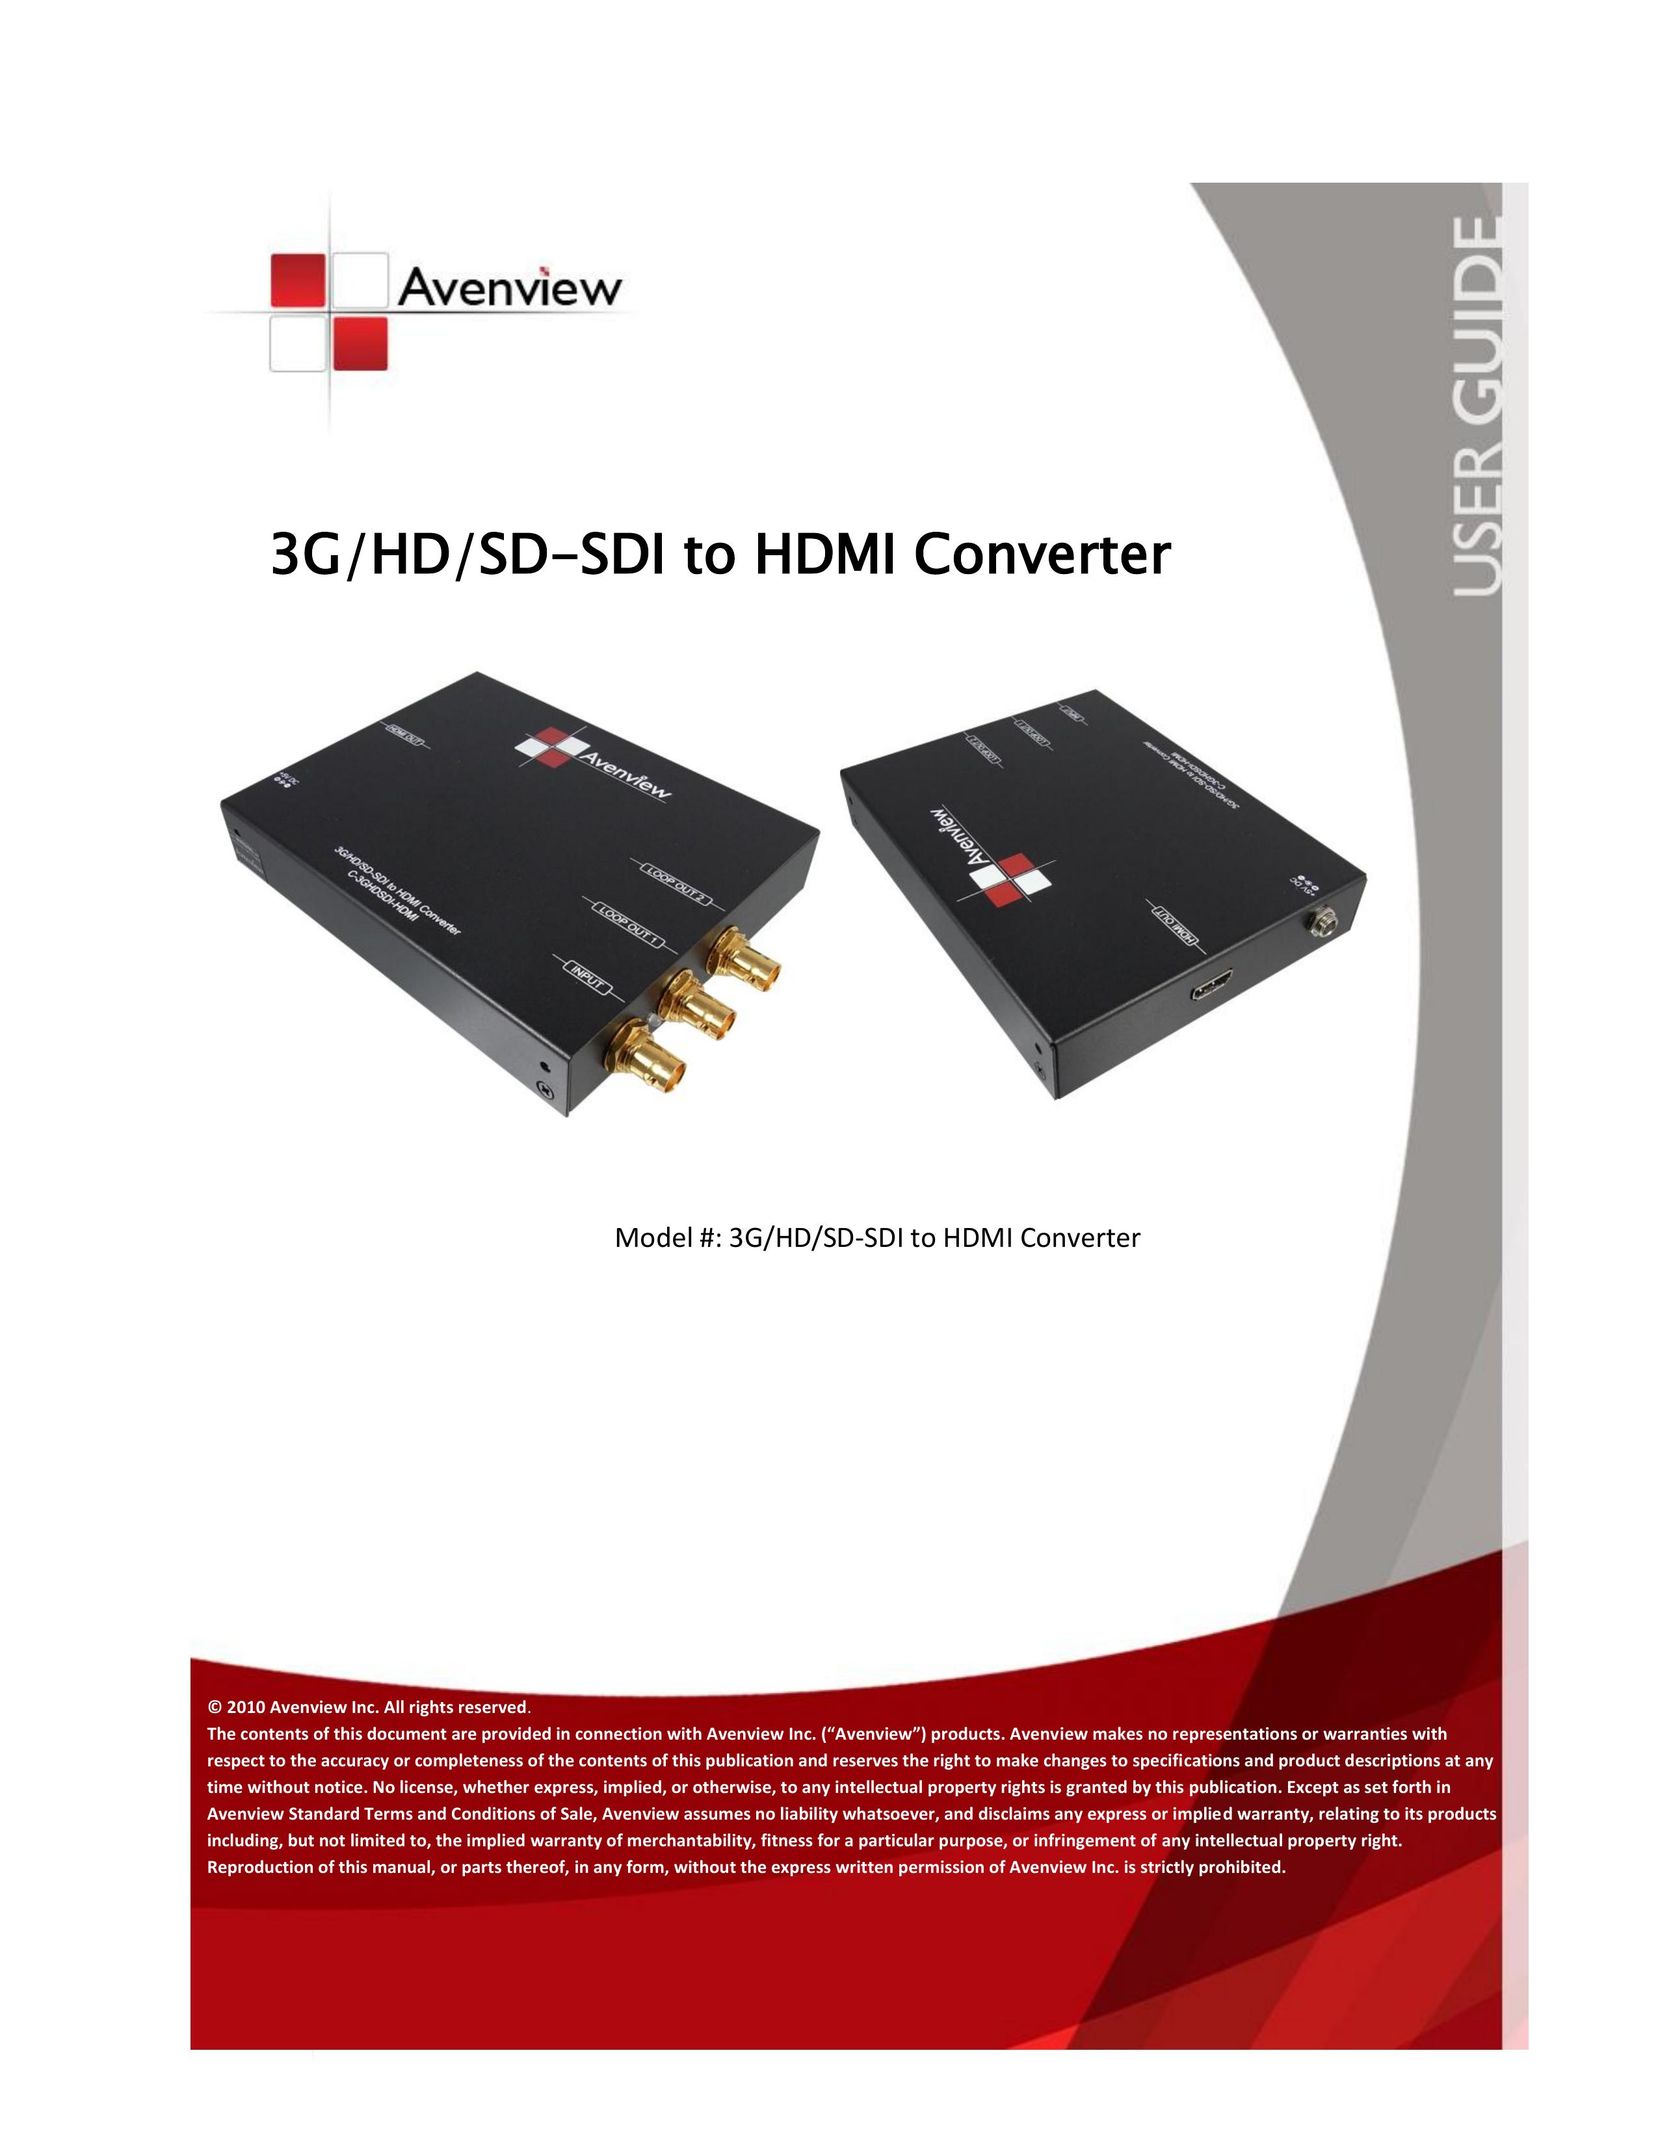 Avenview 3G/HD/SD-SDI to HDMI Cable Box User Manual (Page 1)